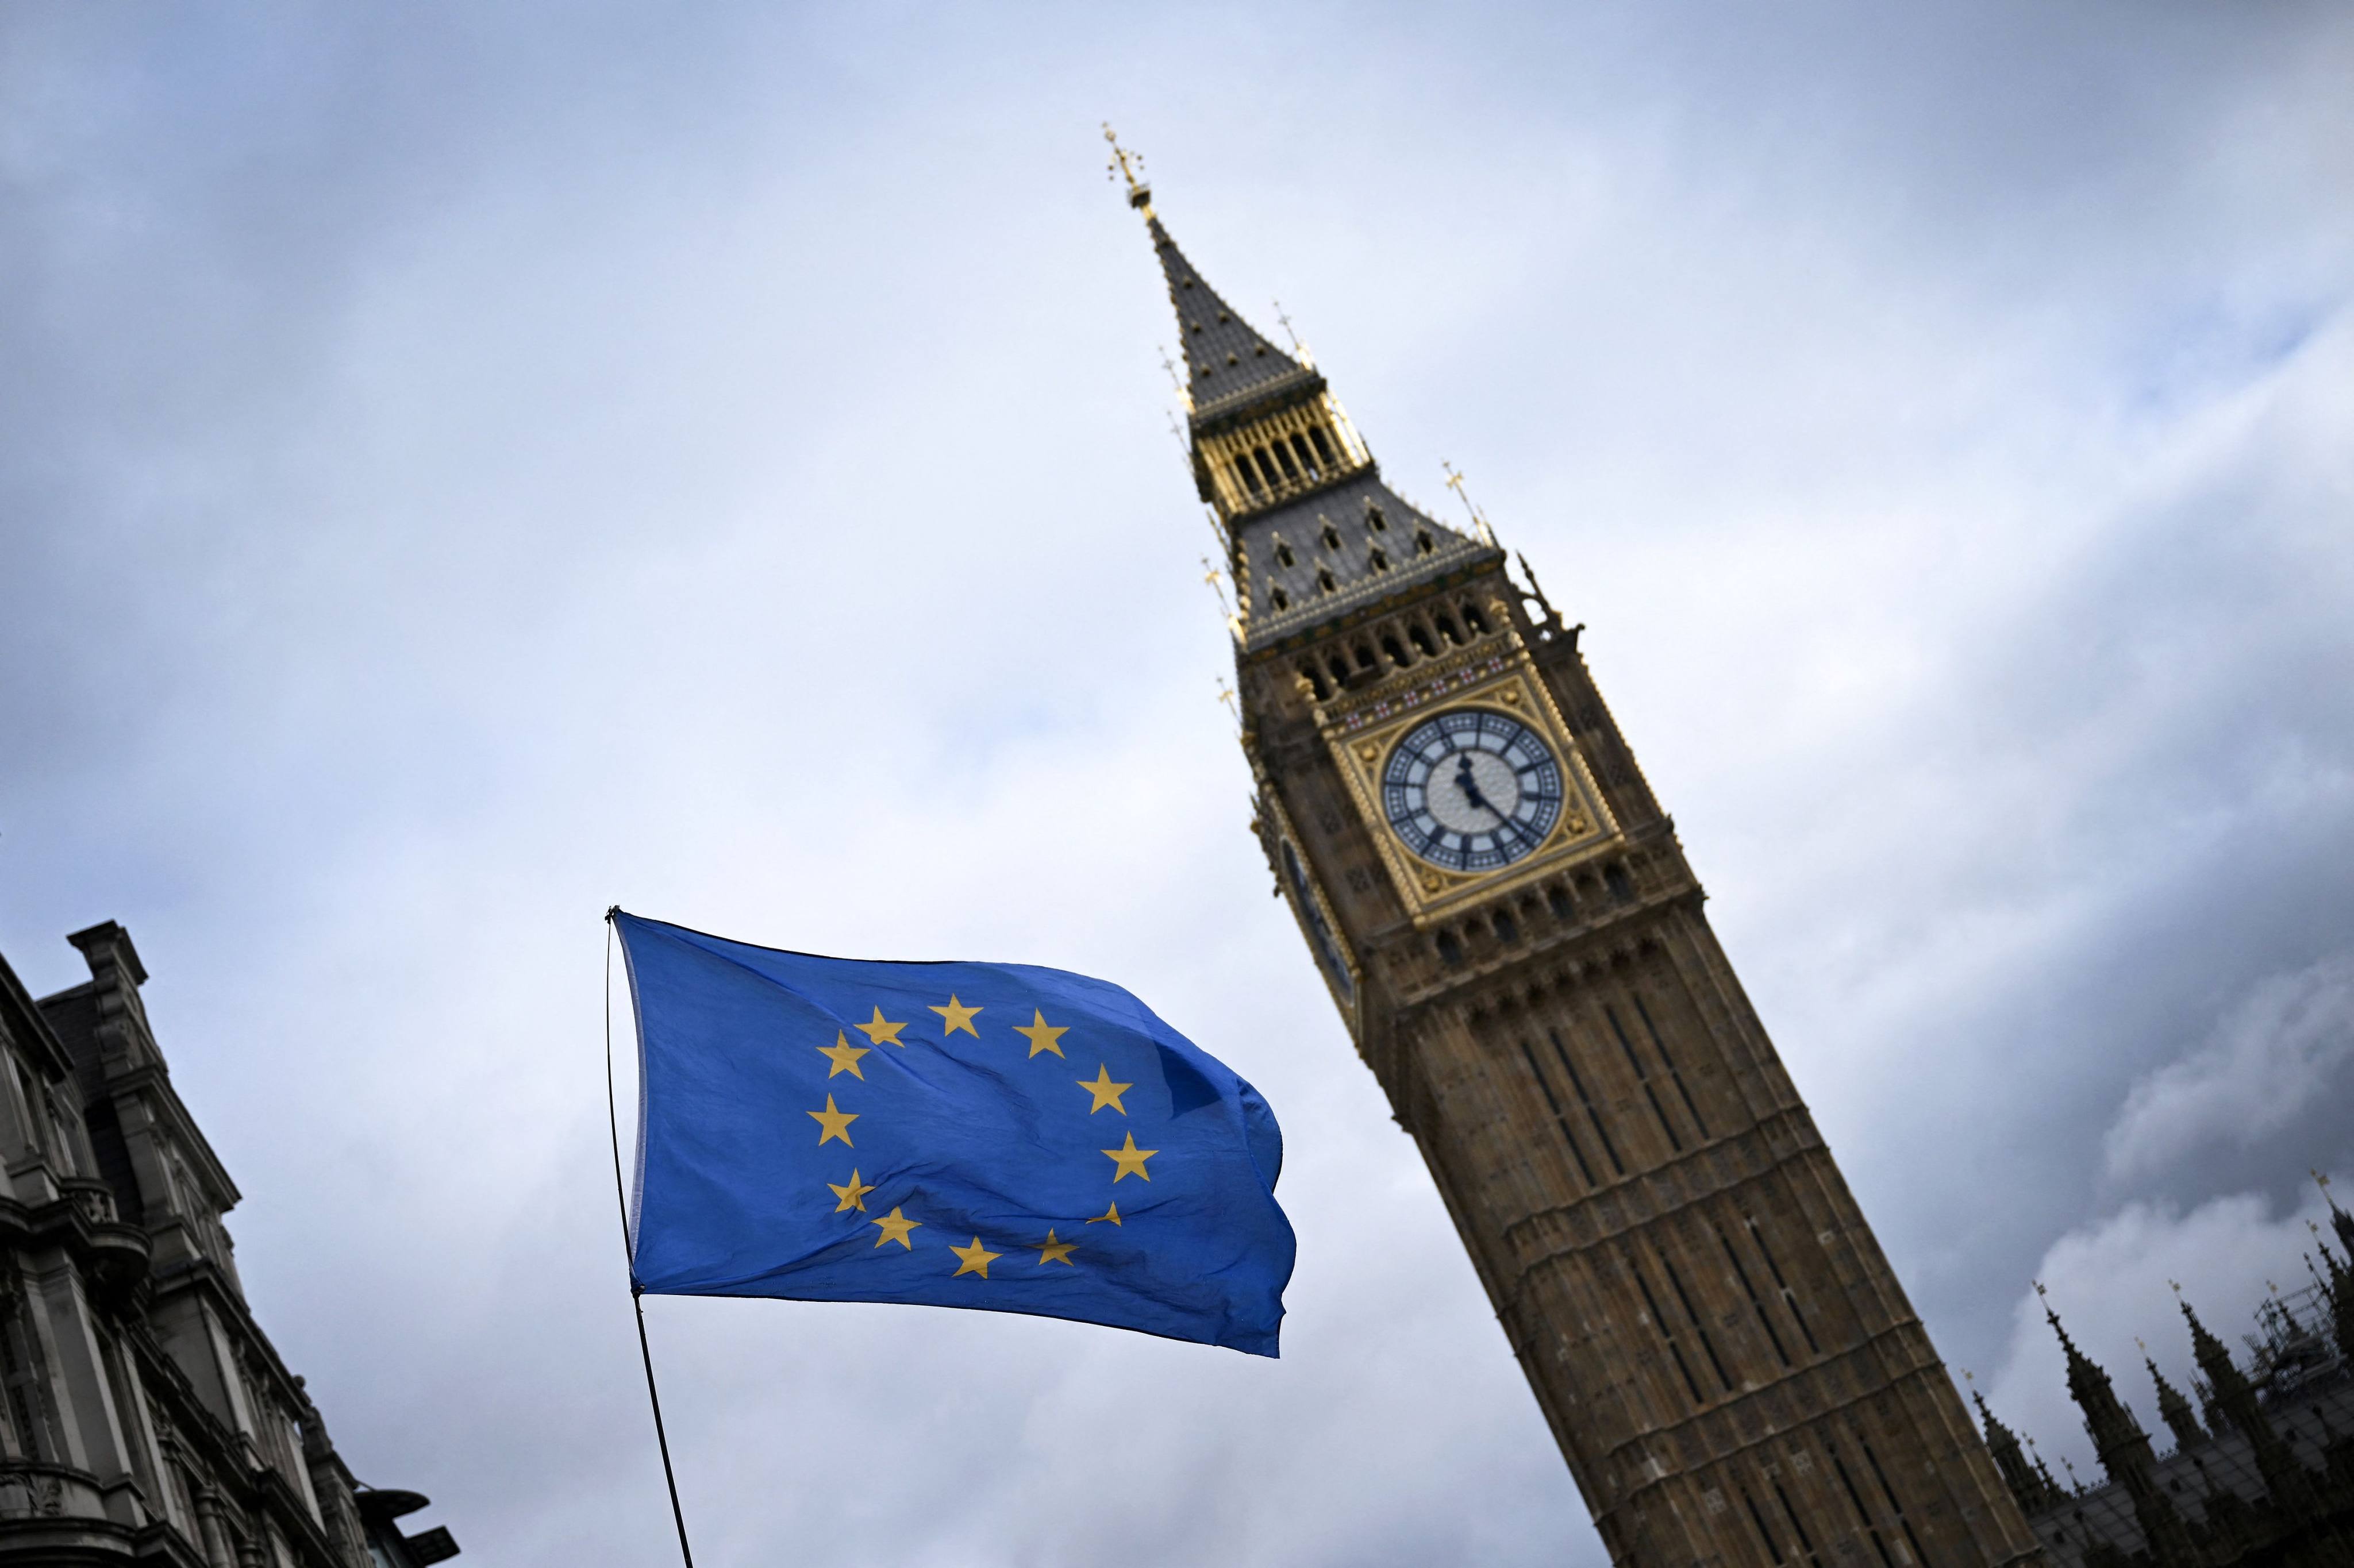 A European Union flag, flown by anti-Brexit activists, flaps in wind, in front of the Elizabeth Tower, commonly known as Big Ben, in central London on March 1. Britain agreed on Friday to join the Comprehensive and Progressive Agreement for Trans-Pacific Partnership, its biggest trade deal since leaving the European Union three years ago. Photo: AFP 